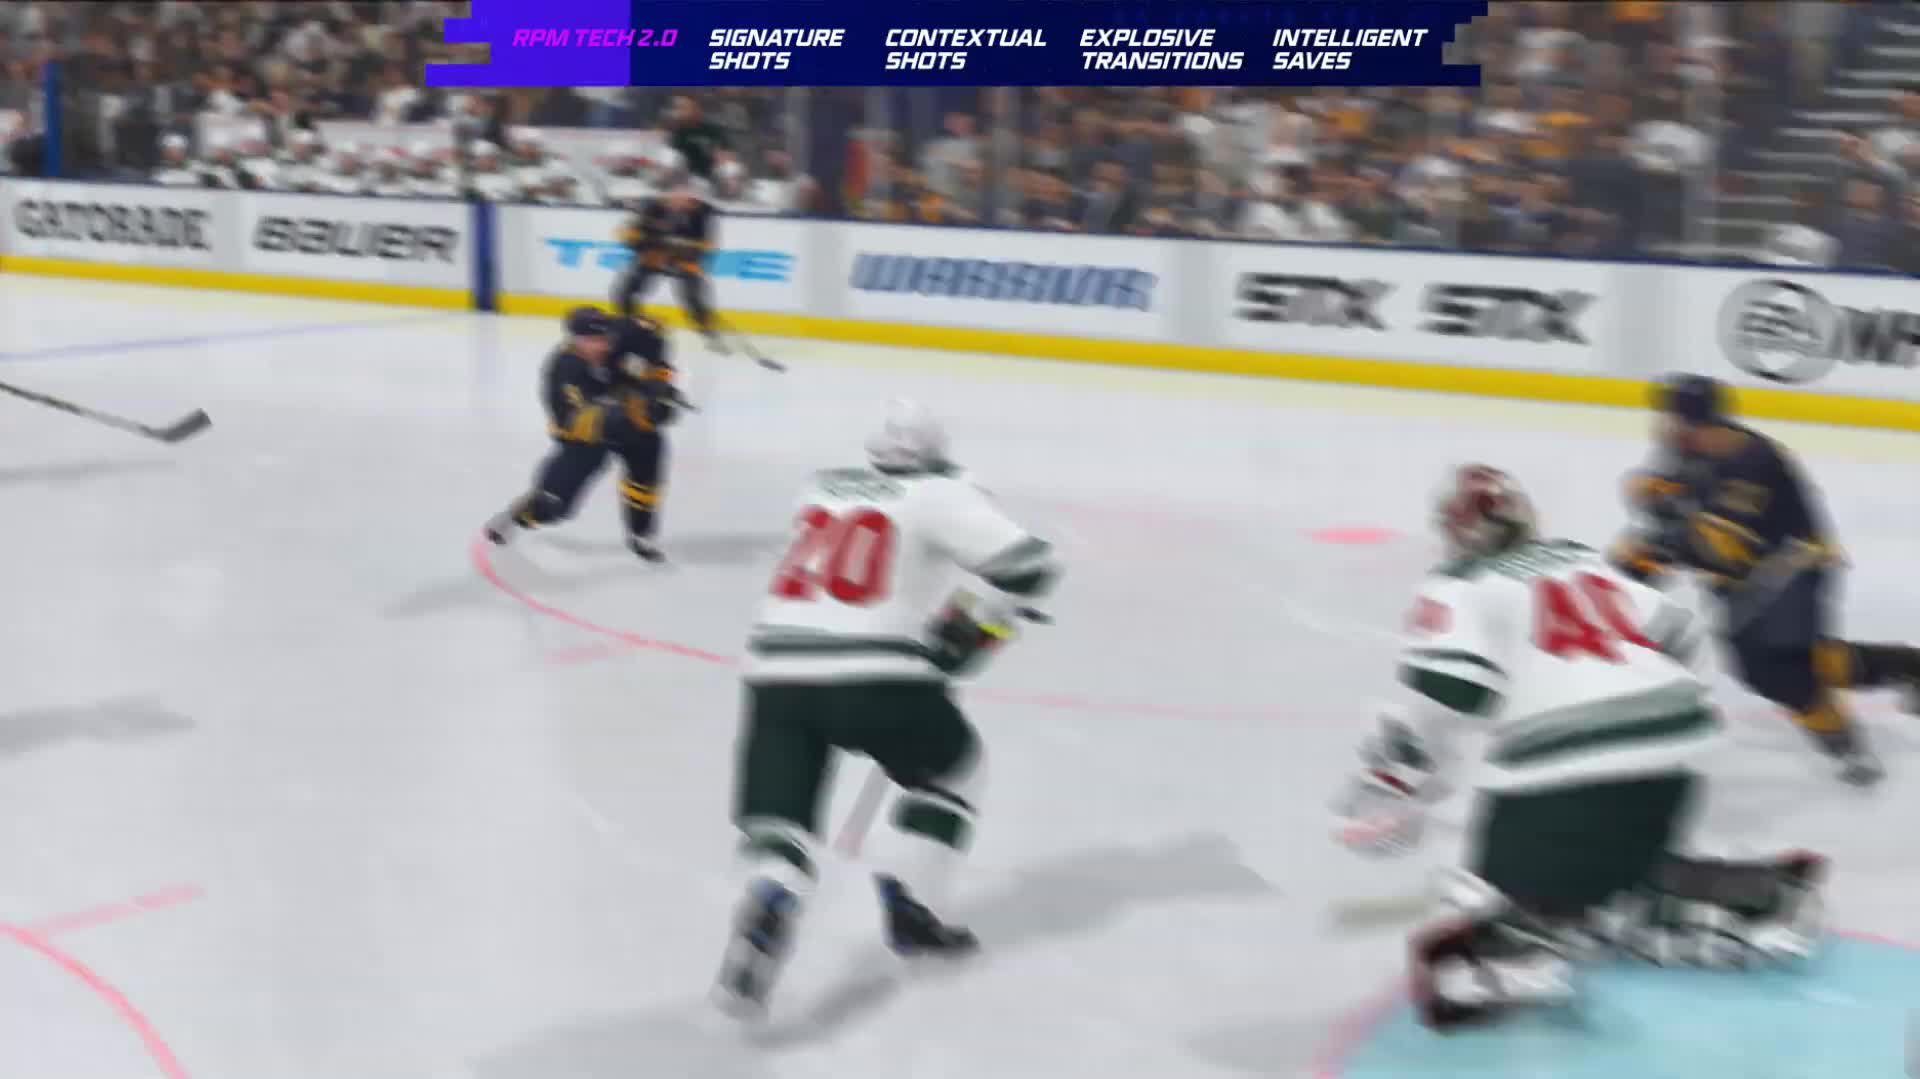 download nhl 20 game for free